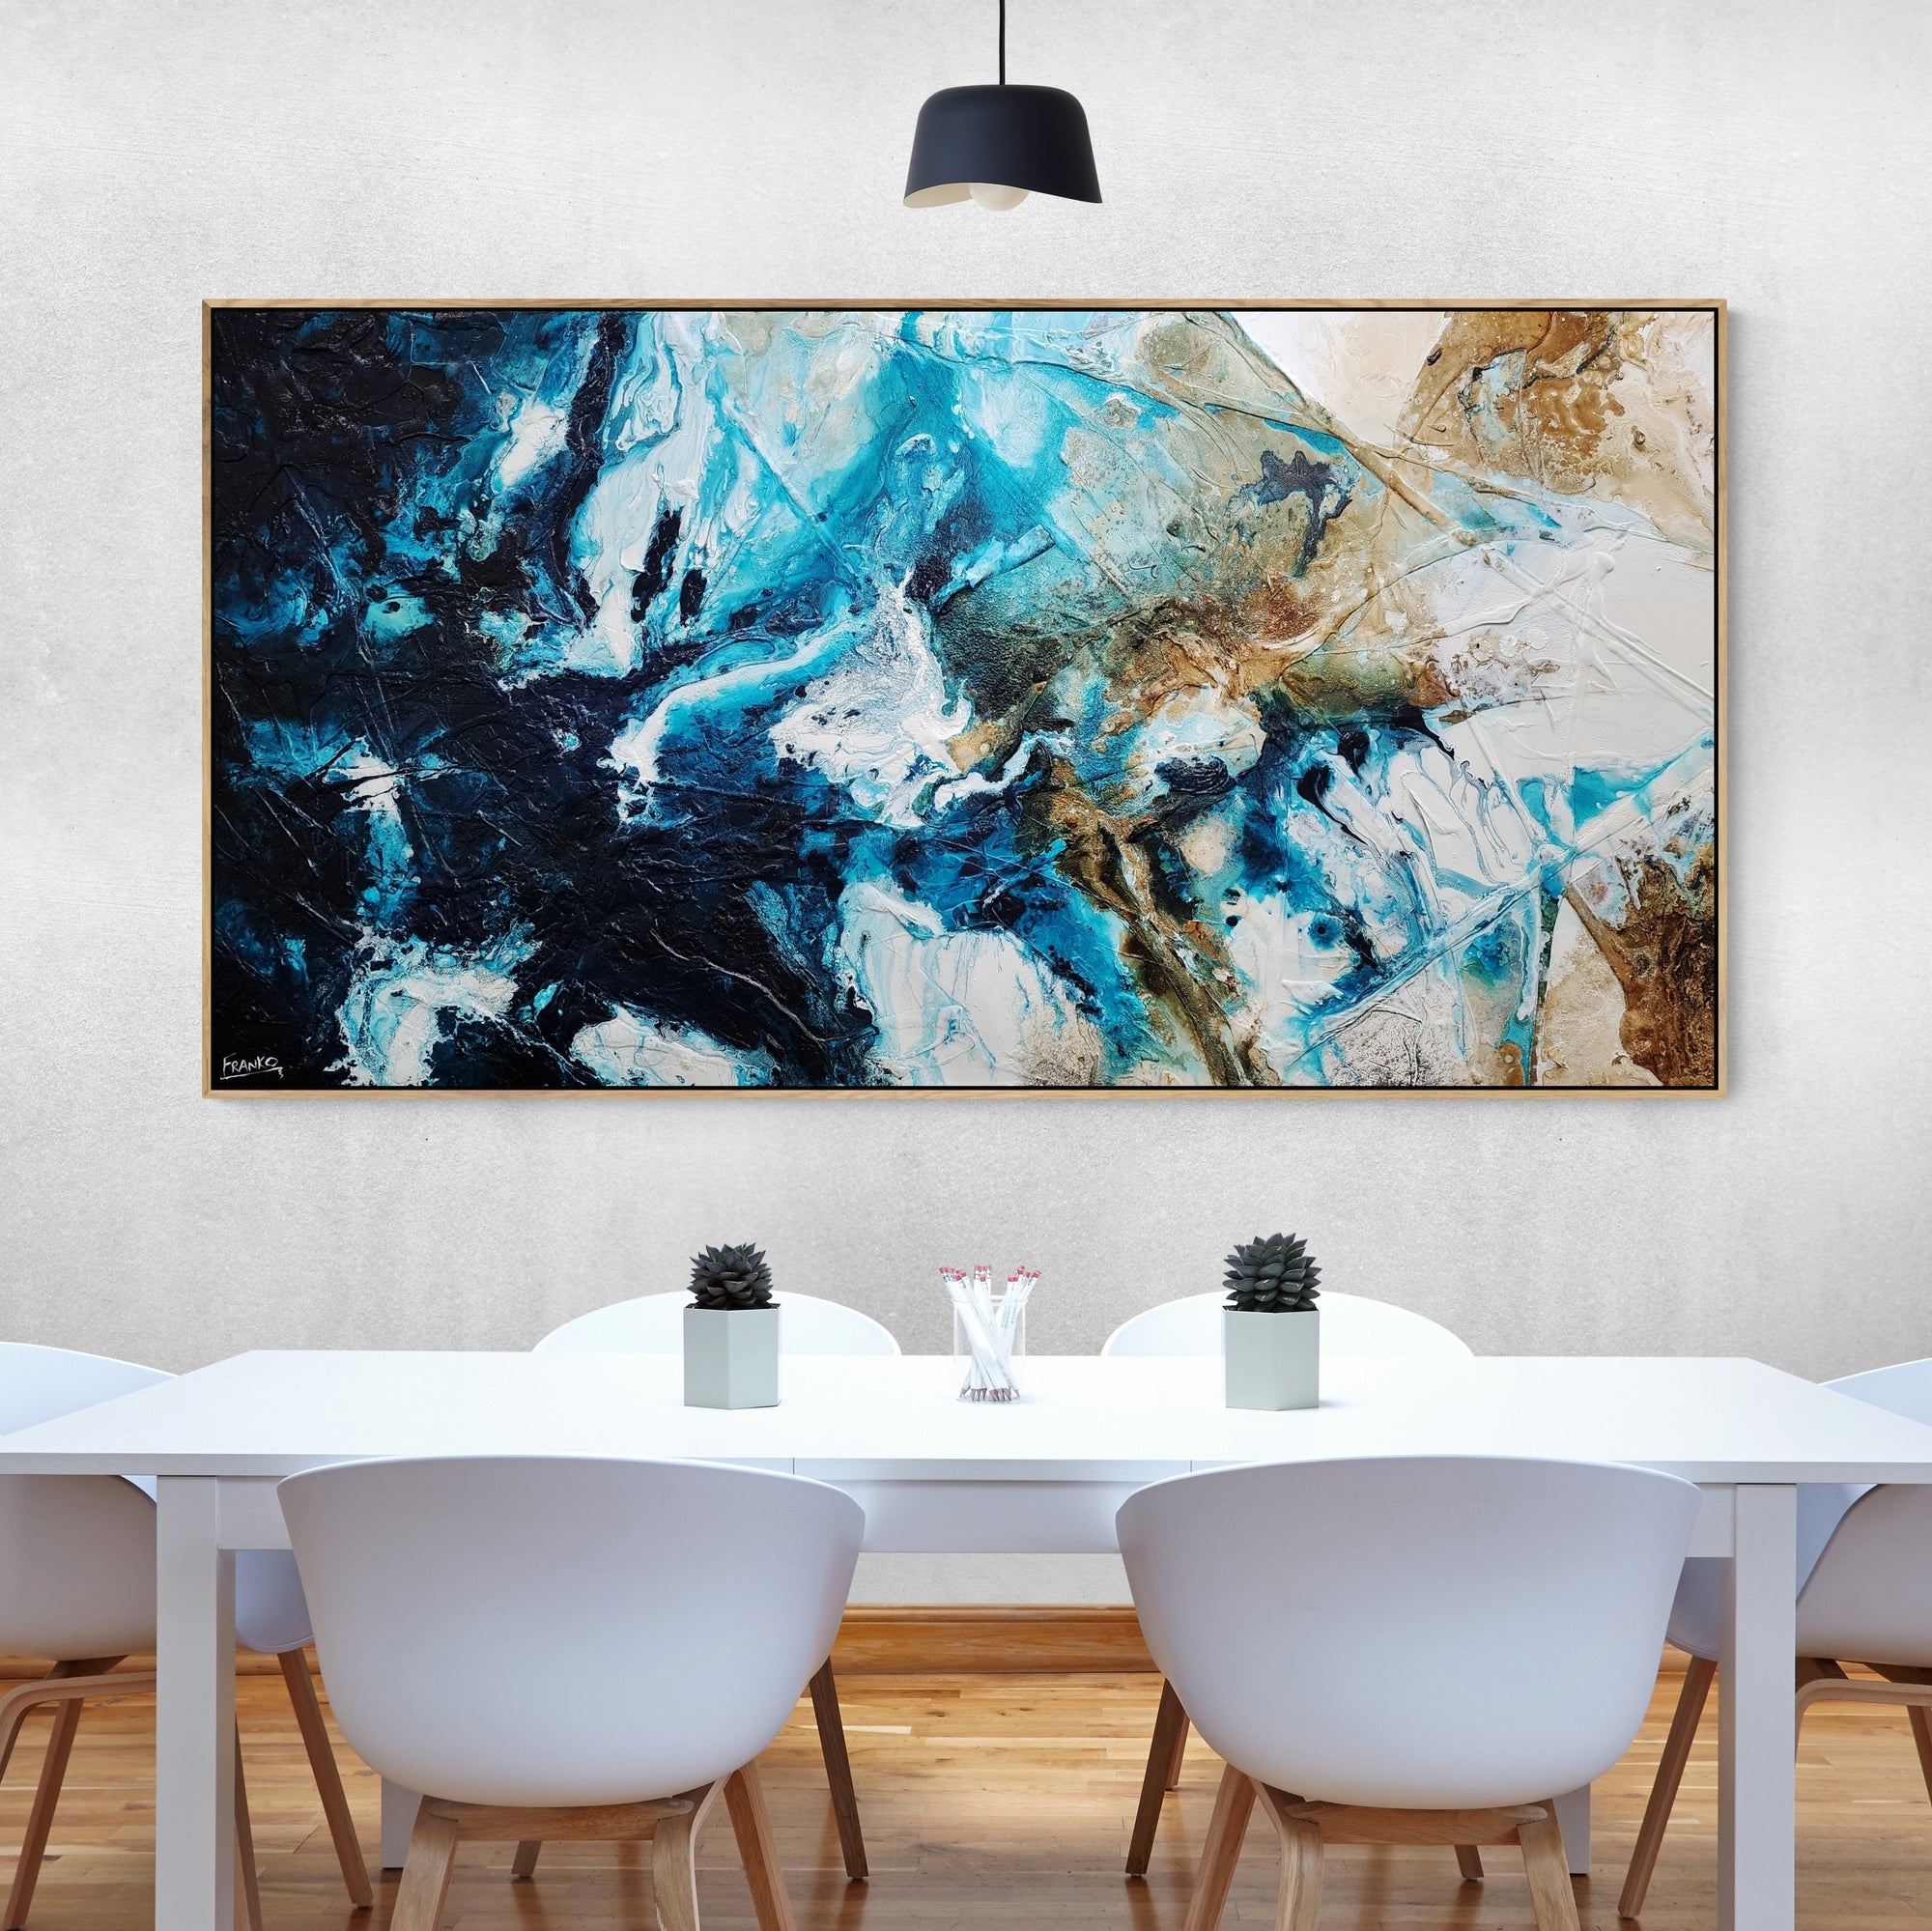 Southern Honey 190cm x 100cm Black Teal White Textured Abstract Painting